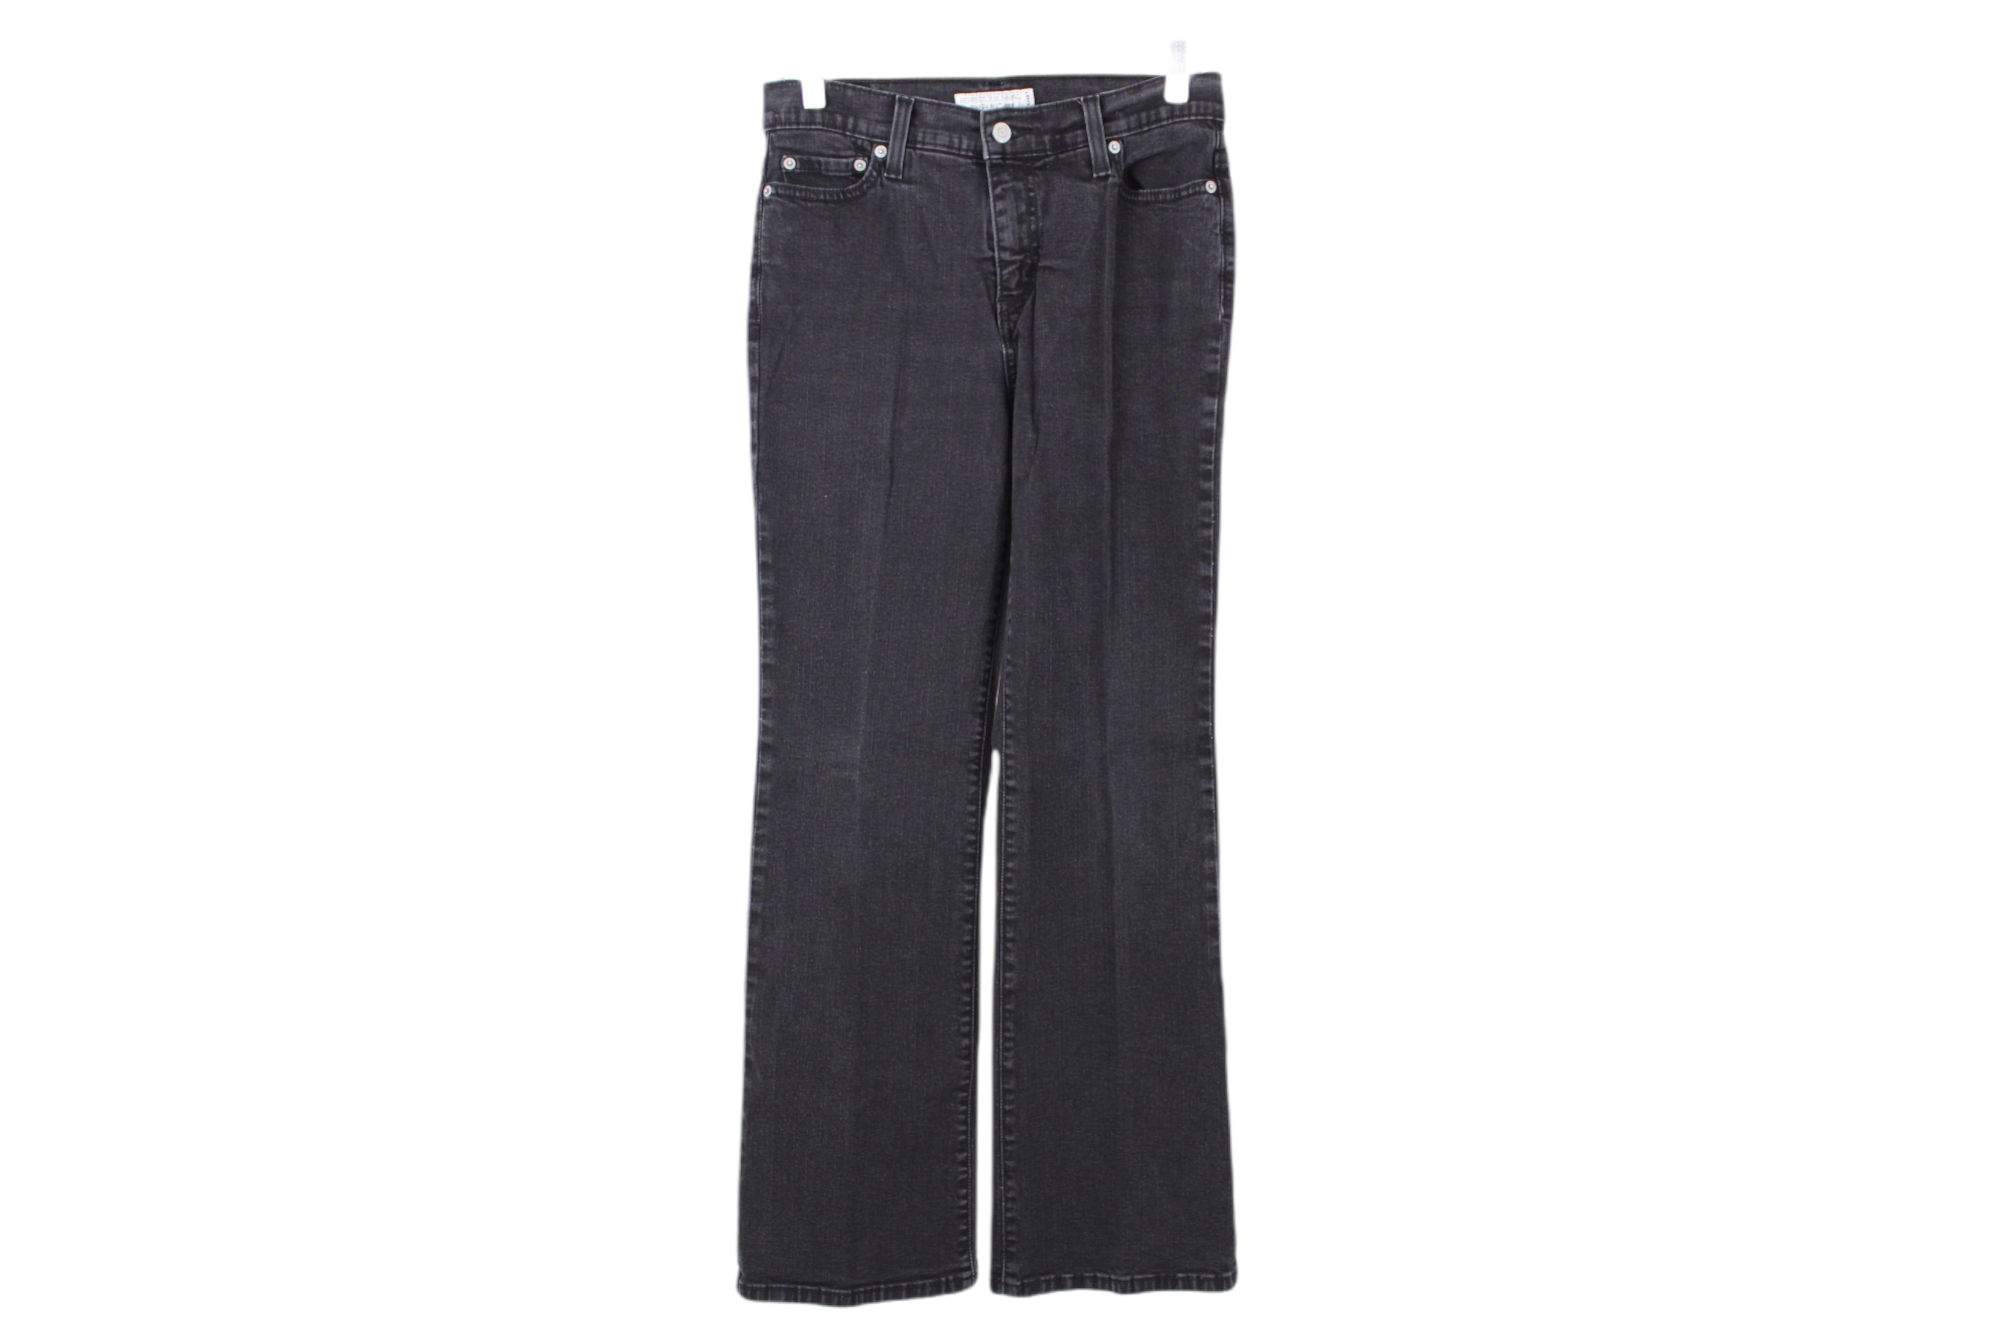 Levi's Perfectly Slimming Bootcut 512 Black high Waisted Jeans | 10 Short